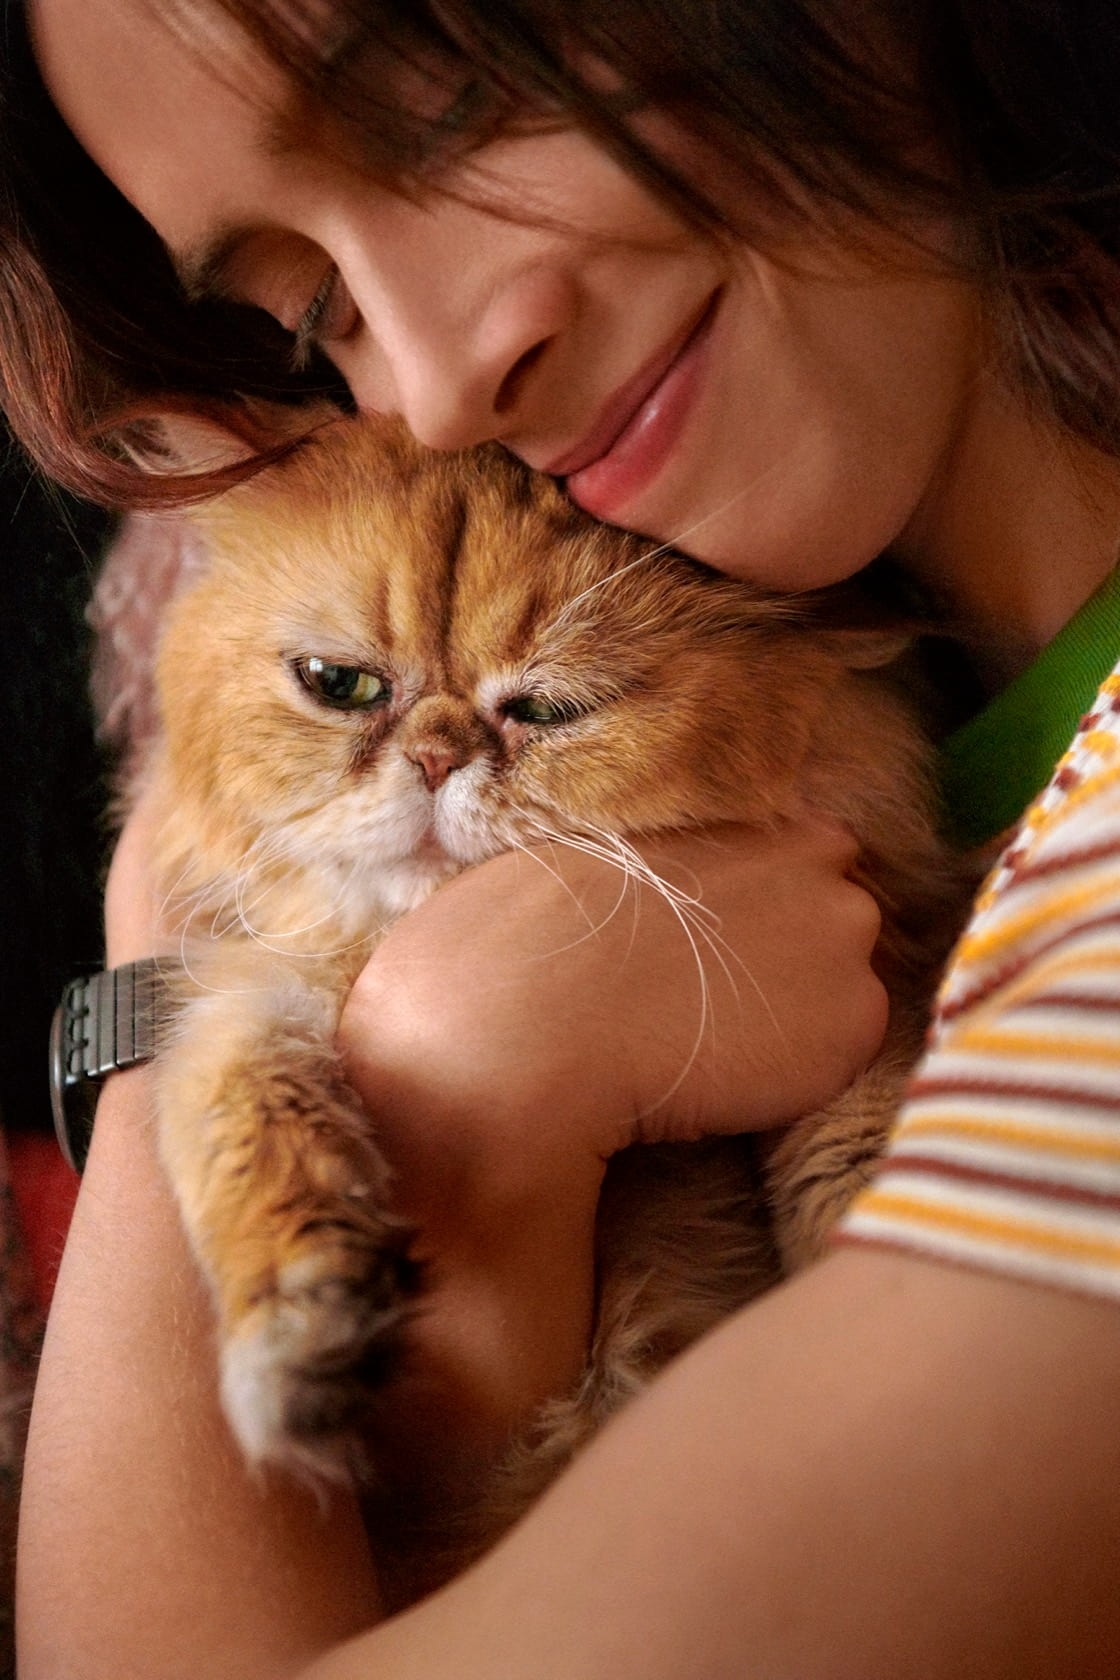 Man with long hair smiling and hugging his fluffy orange cat